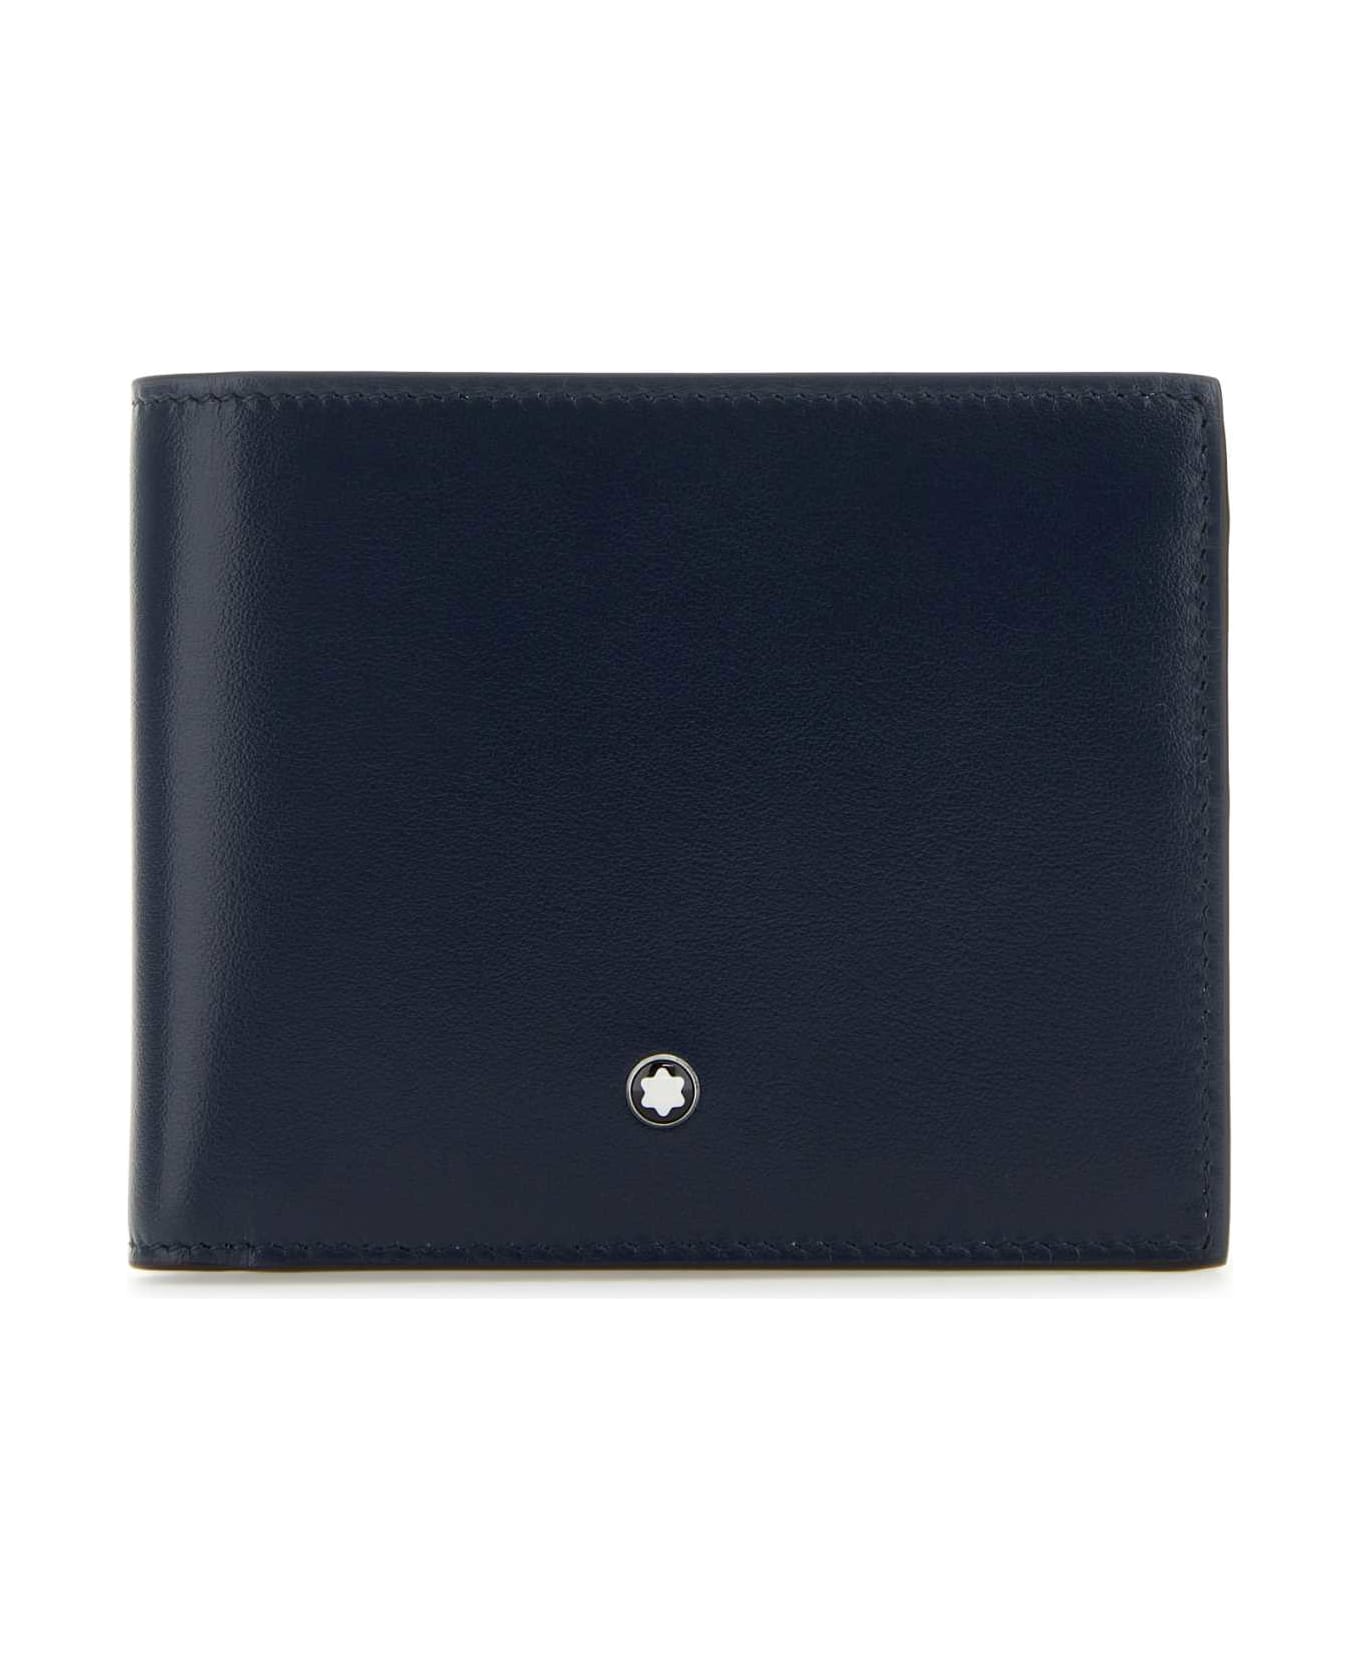 Montblanc Blue Leather Wallet - INKBLUE